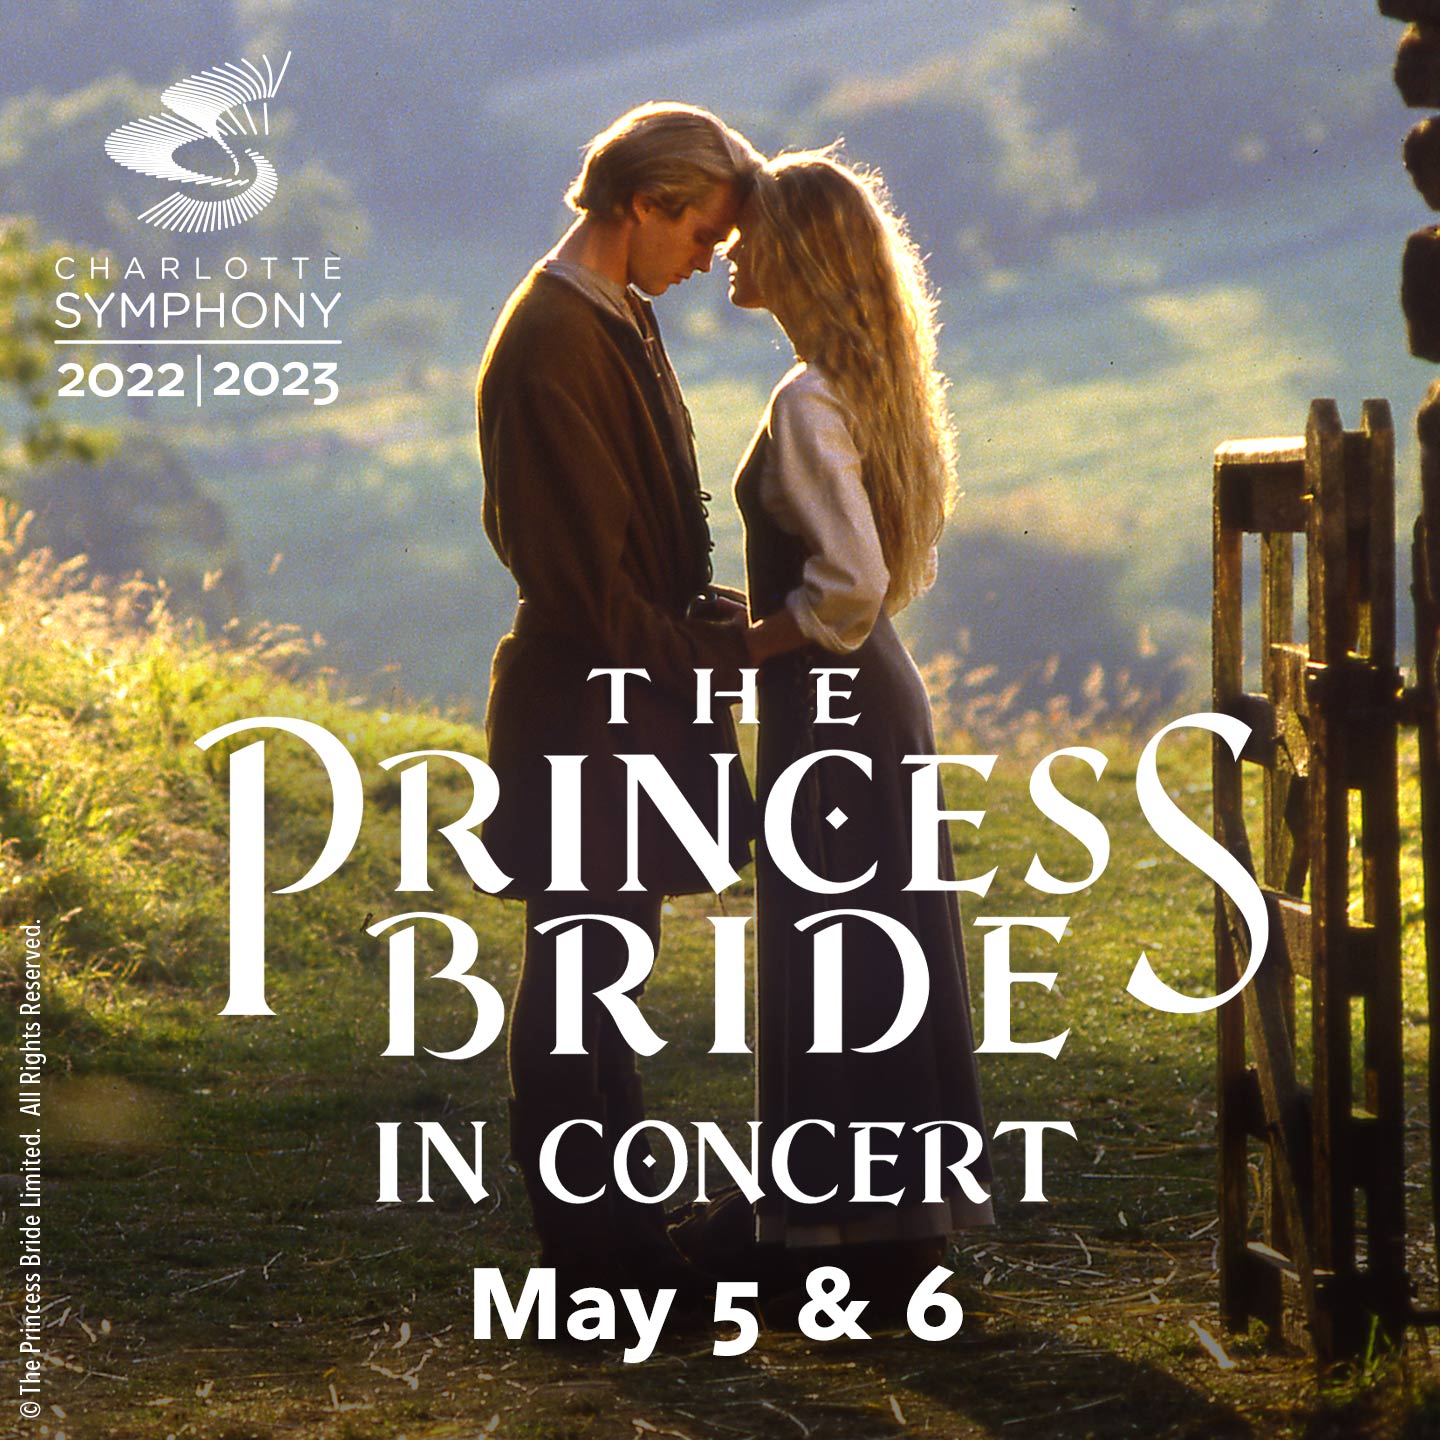 Charlotte Symphony: The Princess Bride in Concert